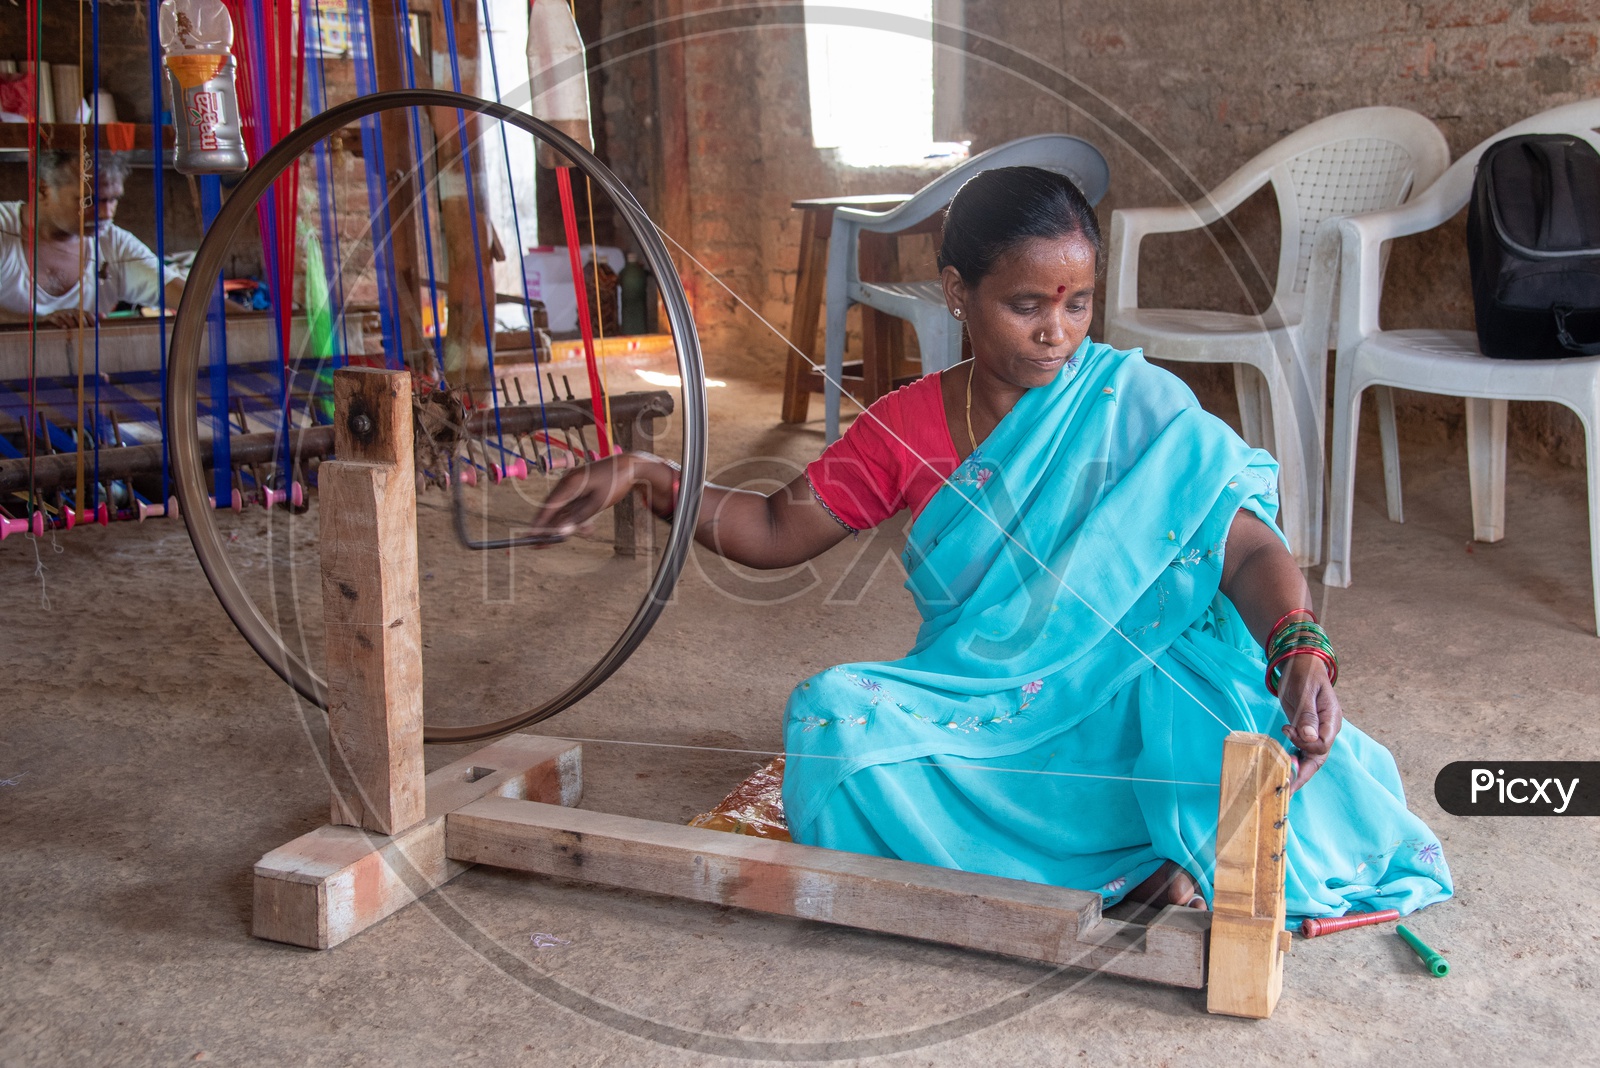 Women working on hand operated spinning wheel for weaving